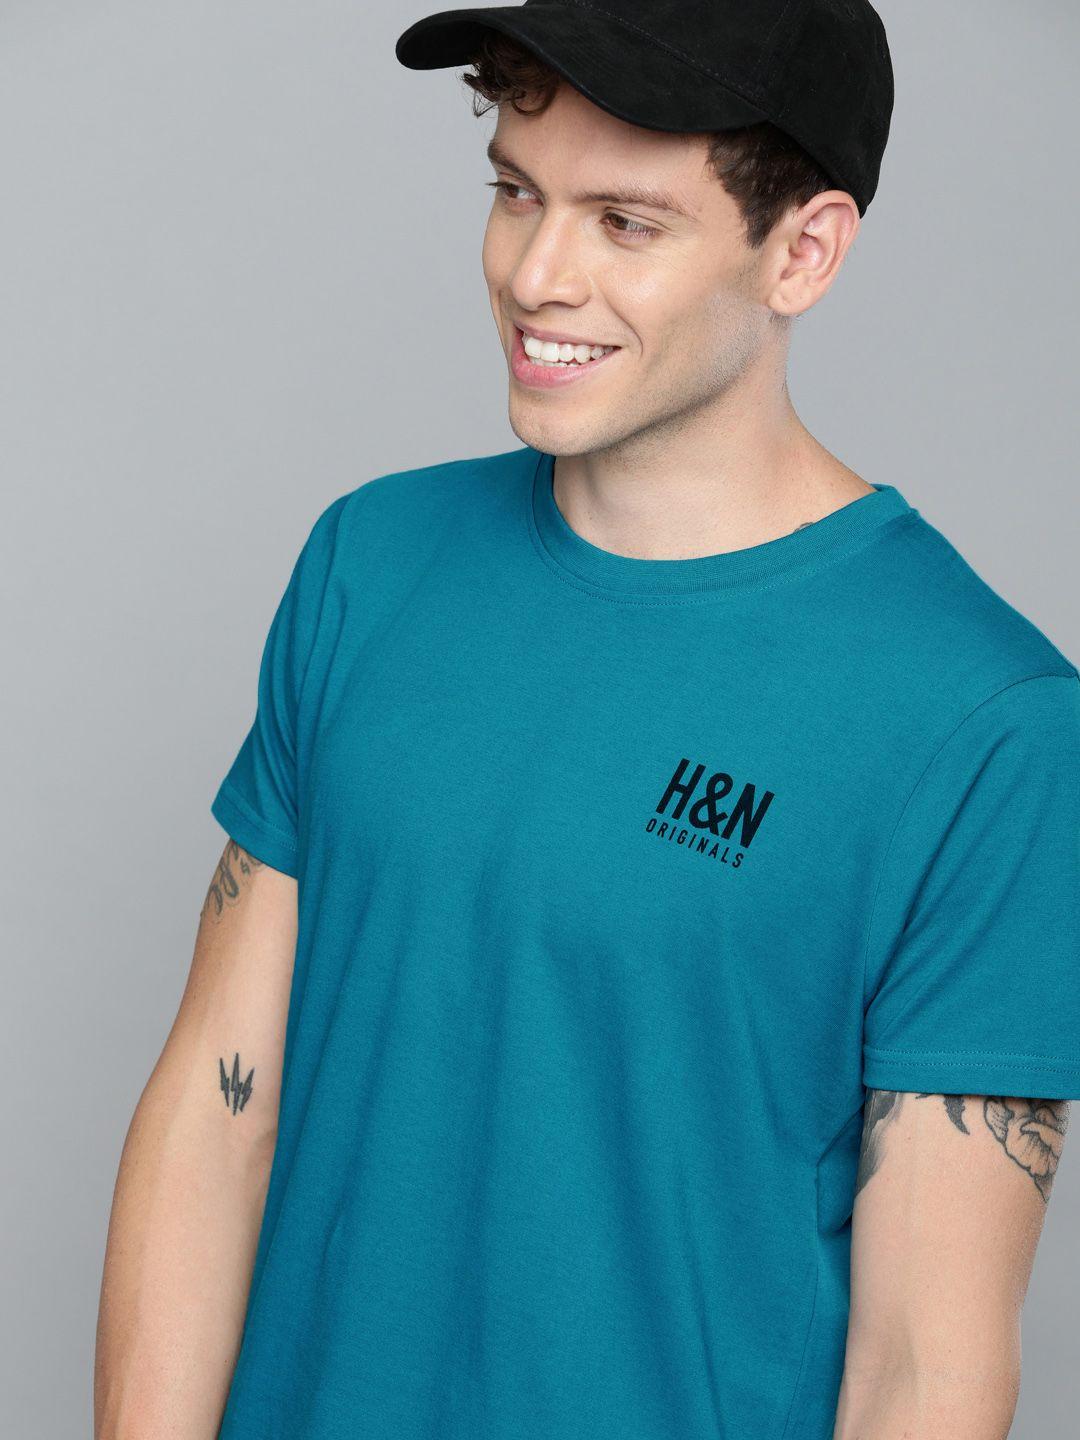 here&now men teal blue solid round neck t-shirt